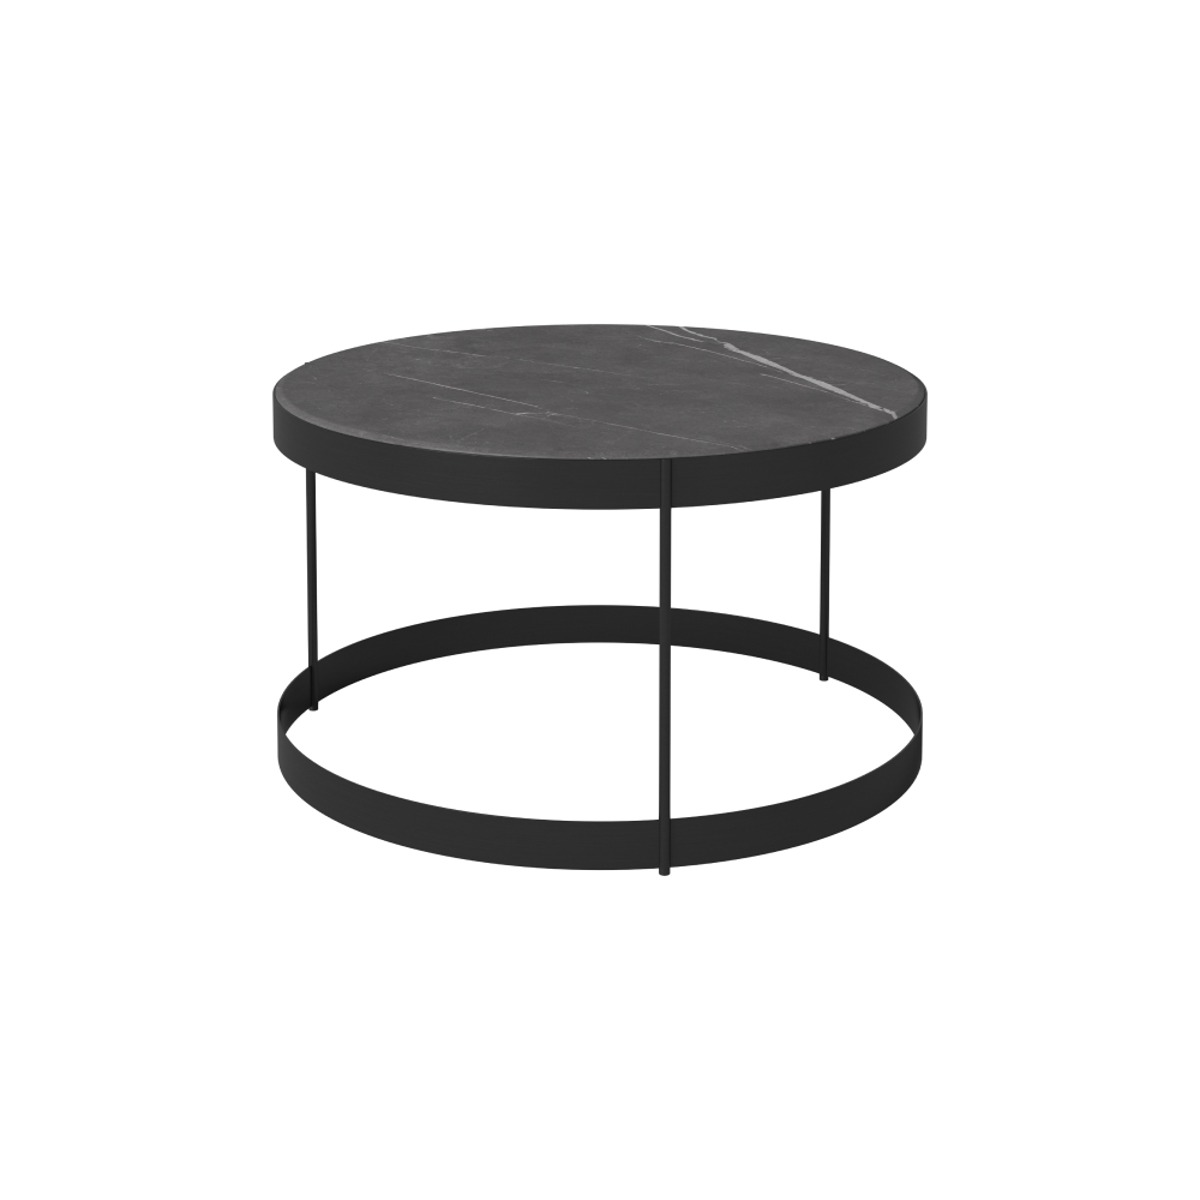 BOLIA [Outdoor] Drum Coffee Table Marble Ø60